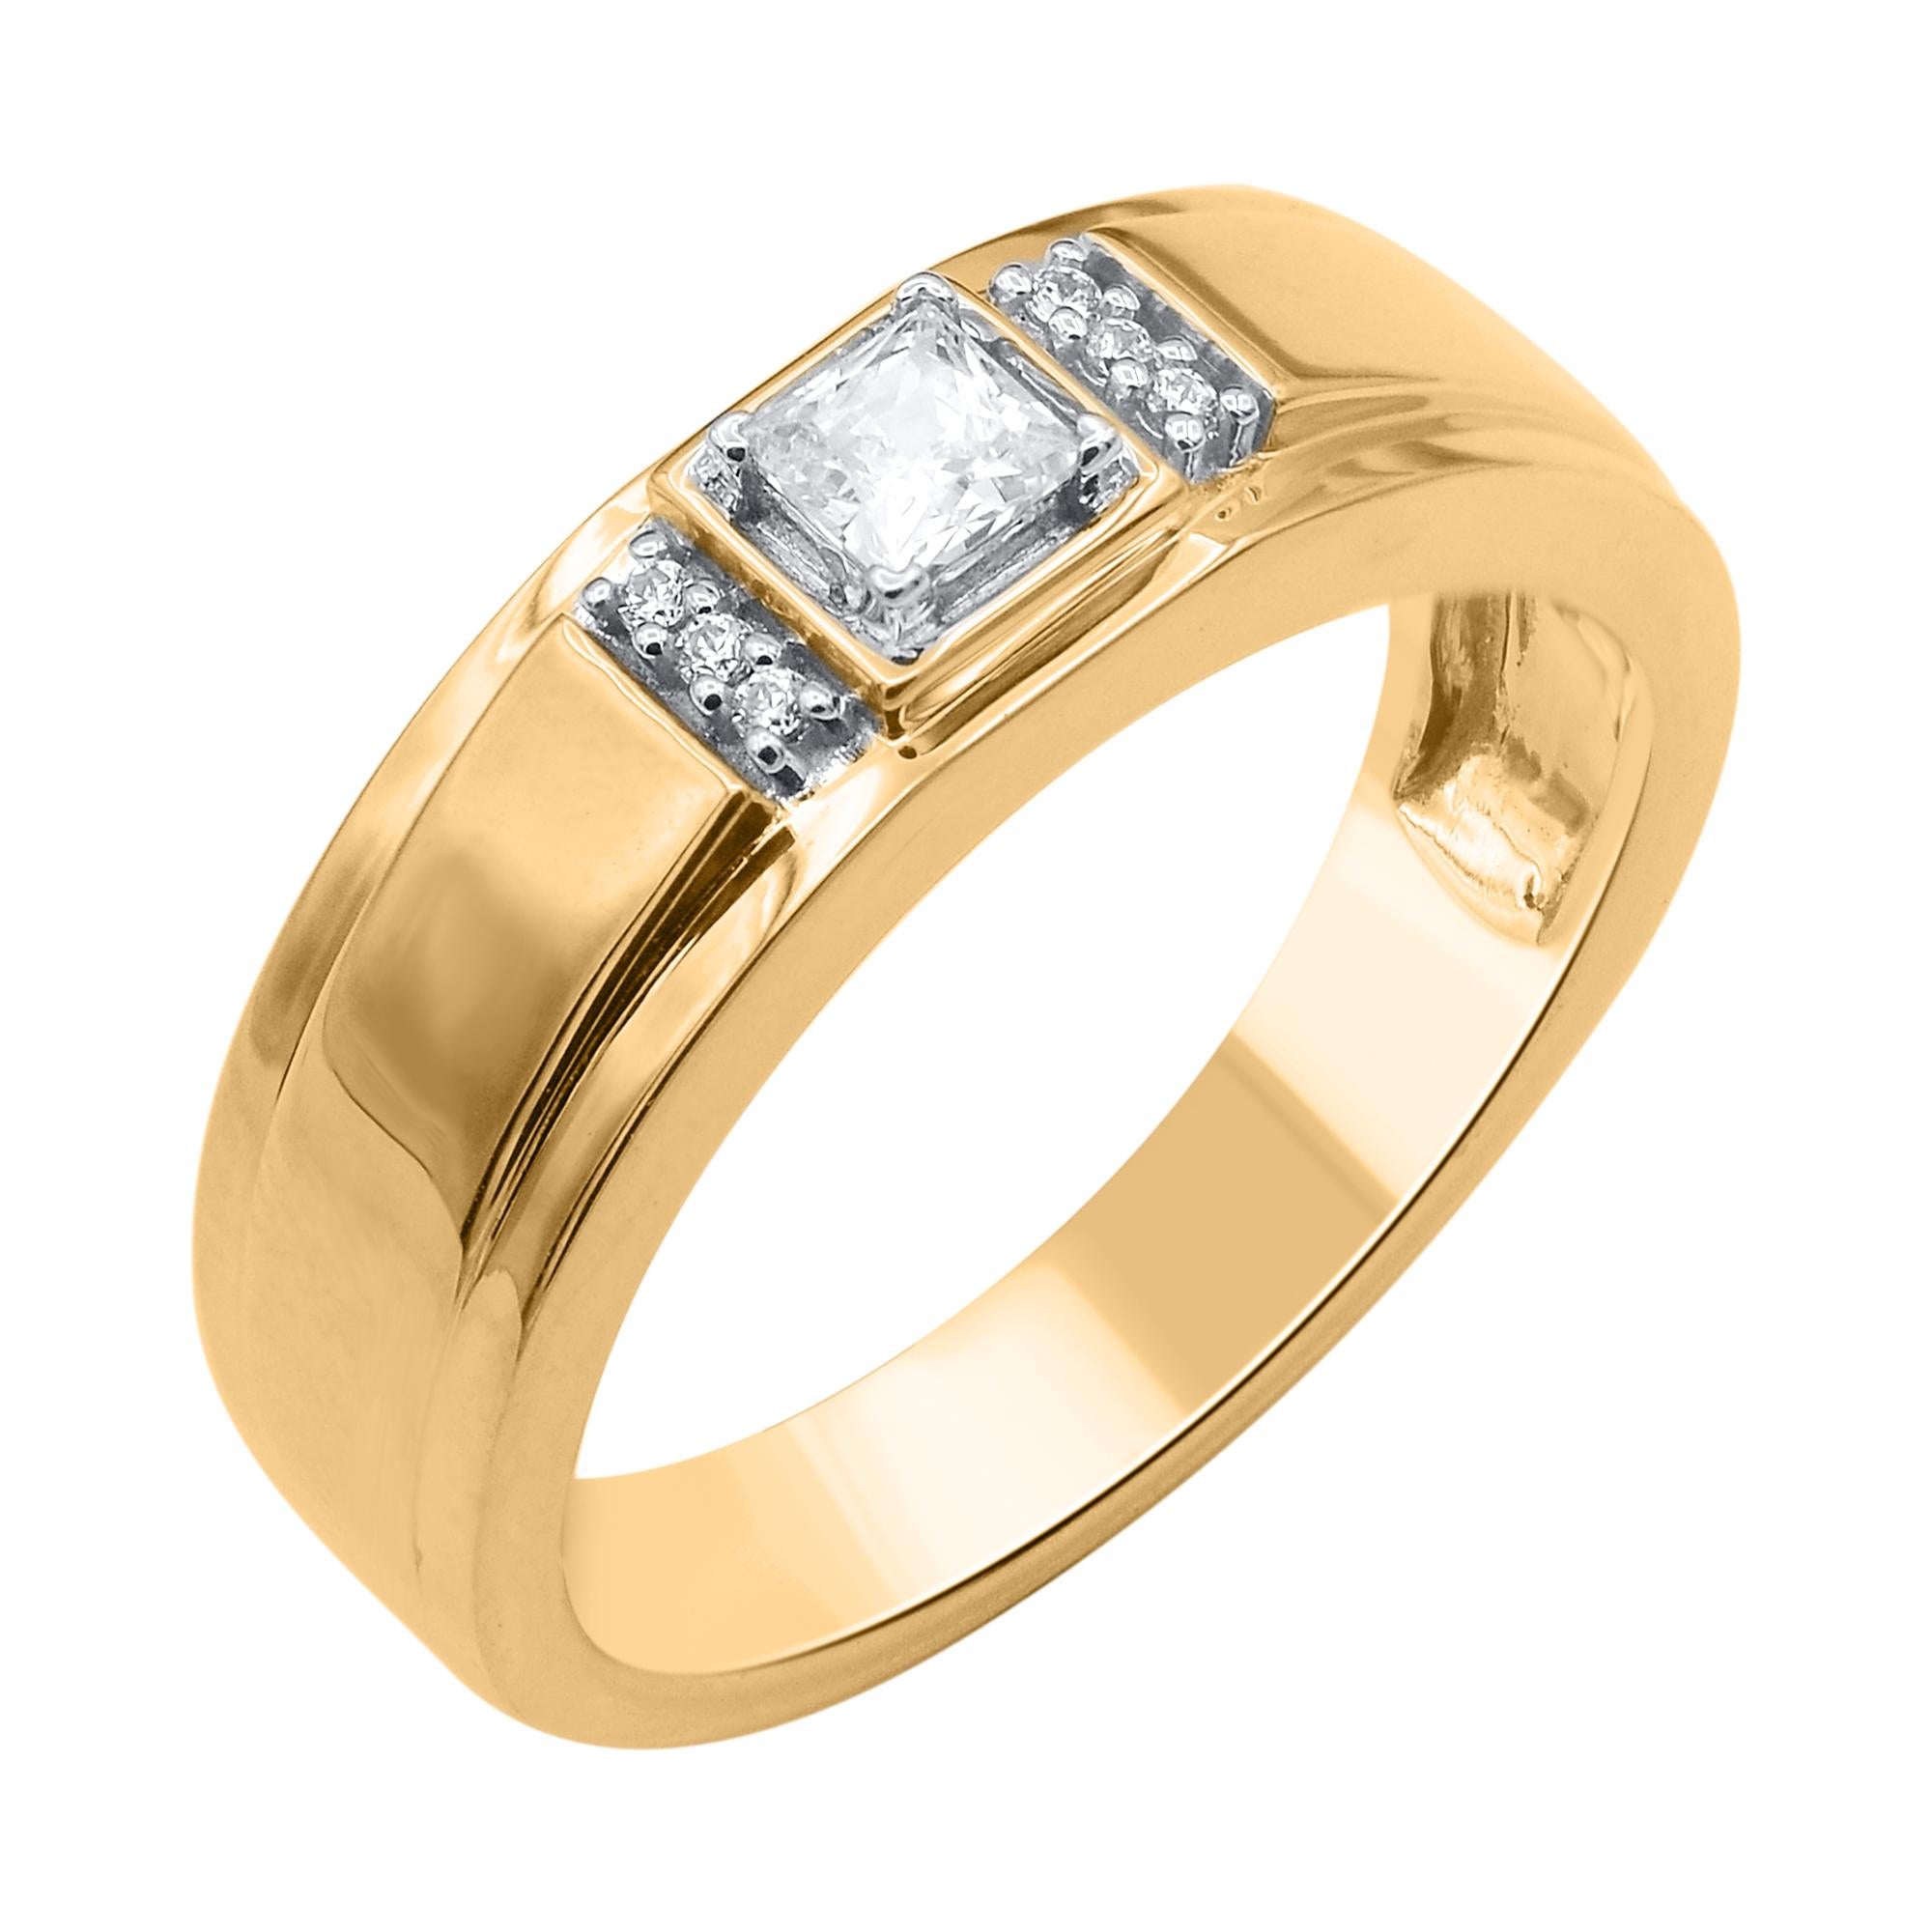 Elegant and refined, this men's wedding band crafted in 0.33 carat Seven stone princess & brilliant Cut natural diamond in prong setting. The white diamonds are graded as H-I color and I-2 clarity.